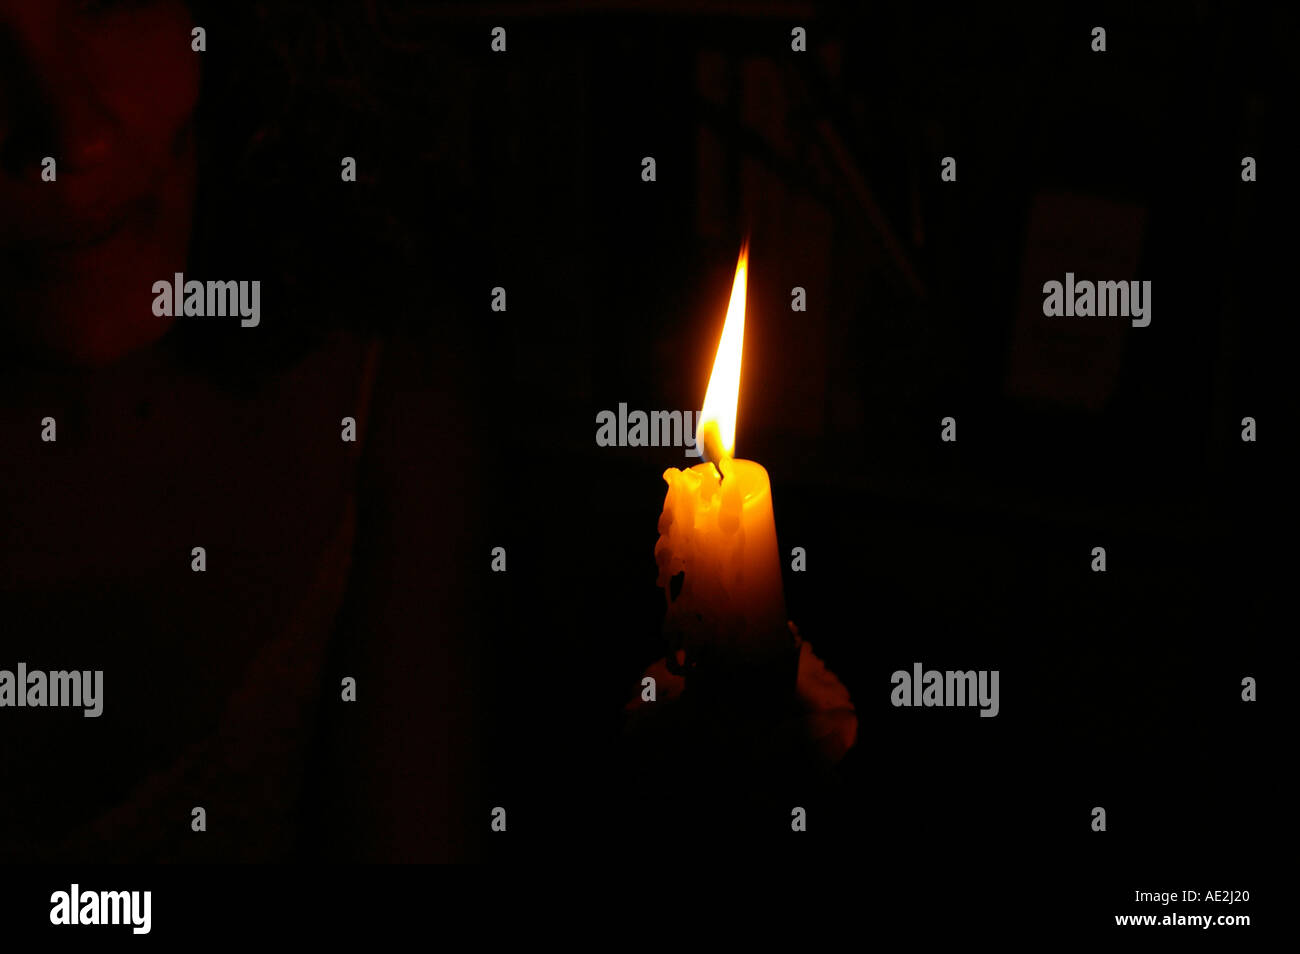 Candle flame light woman in darkness Stock Photo